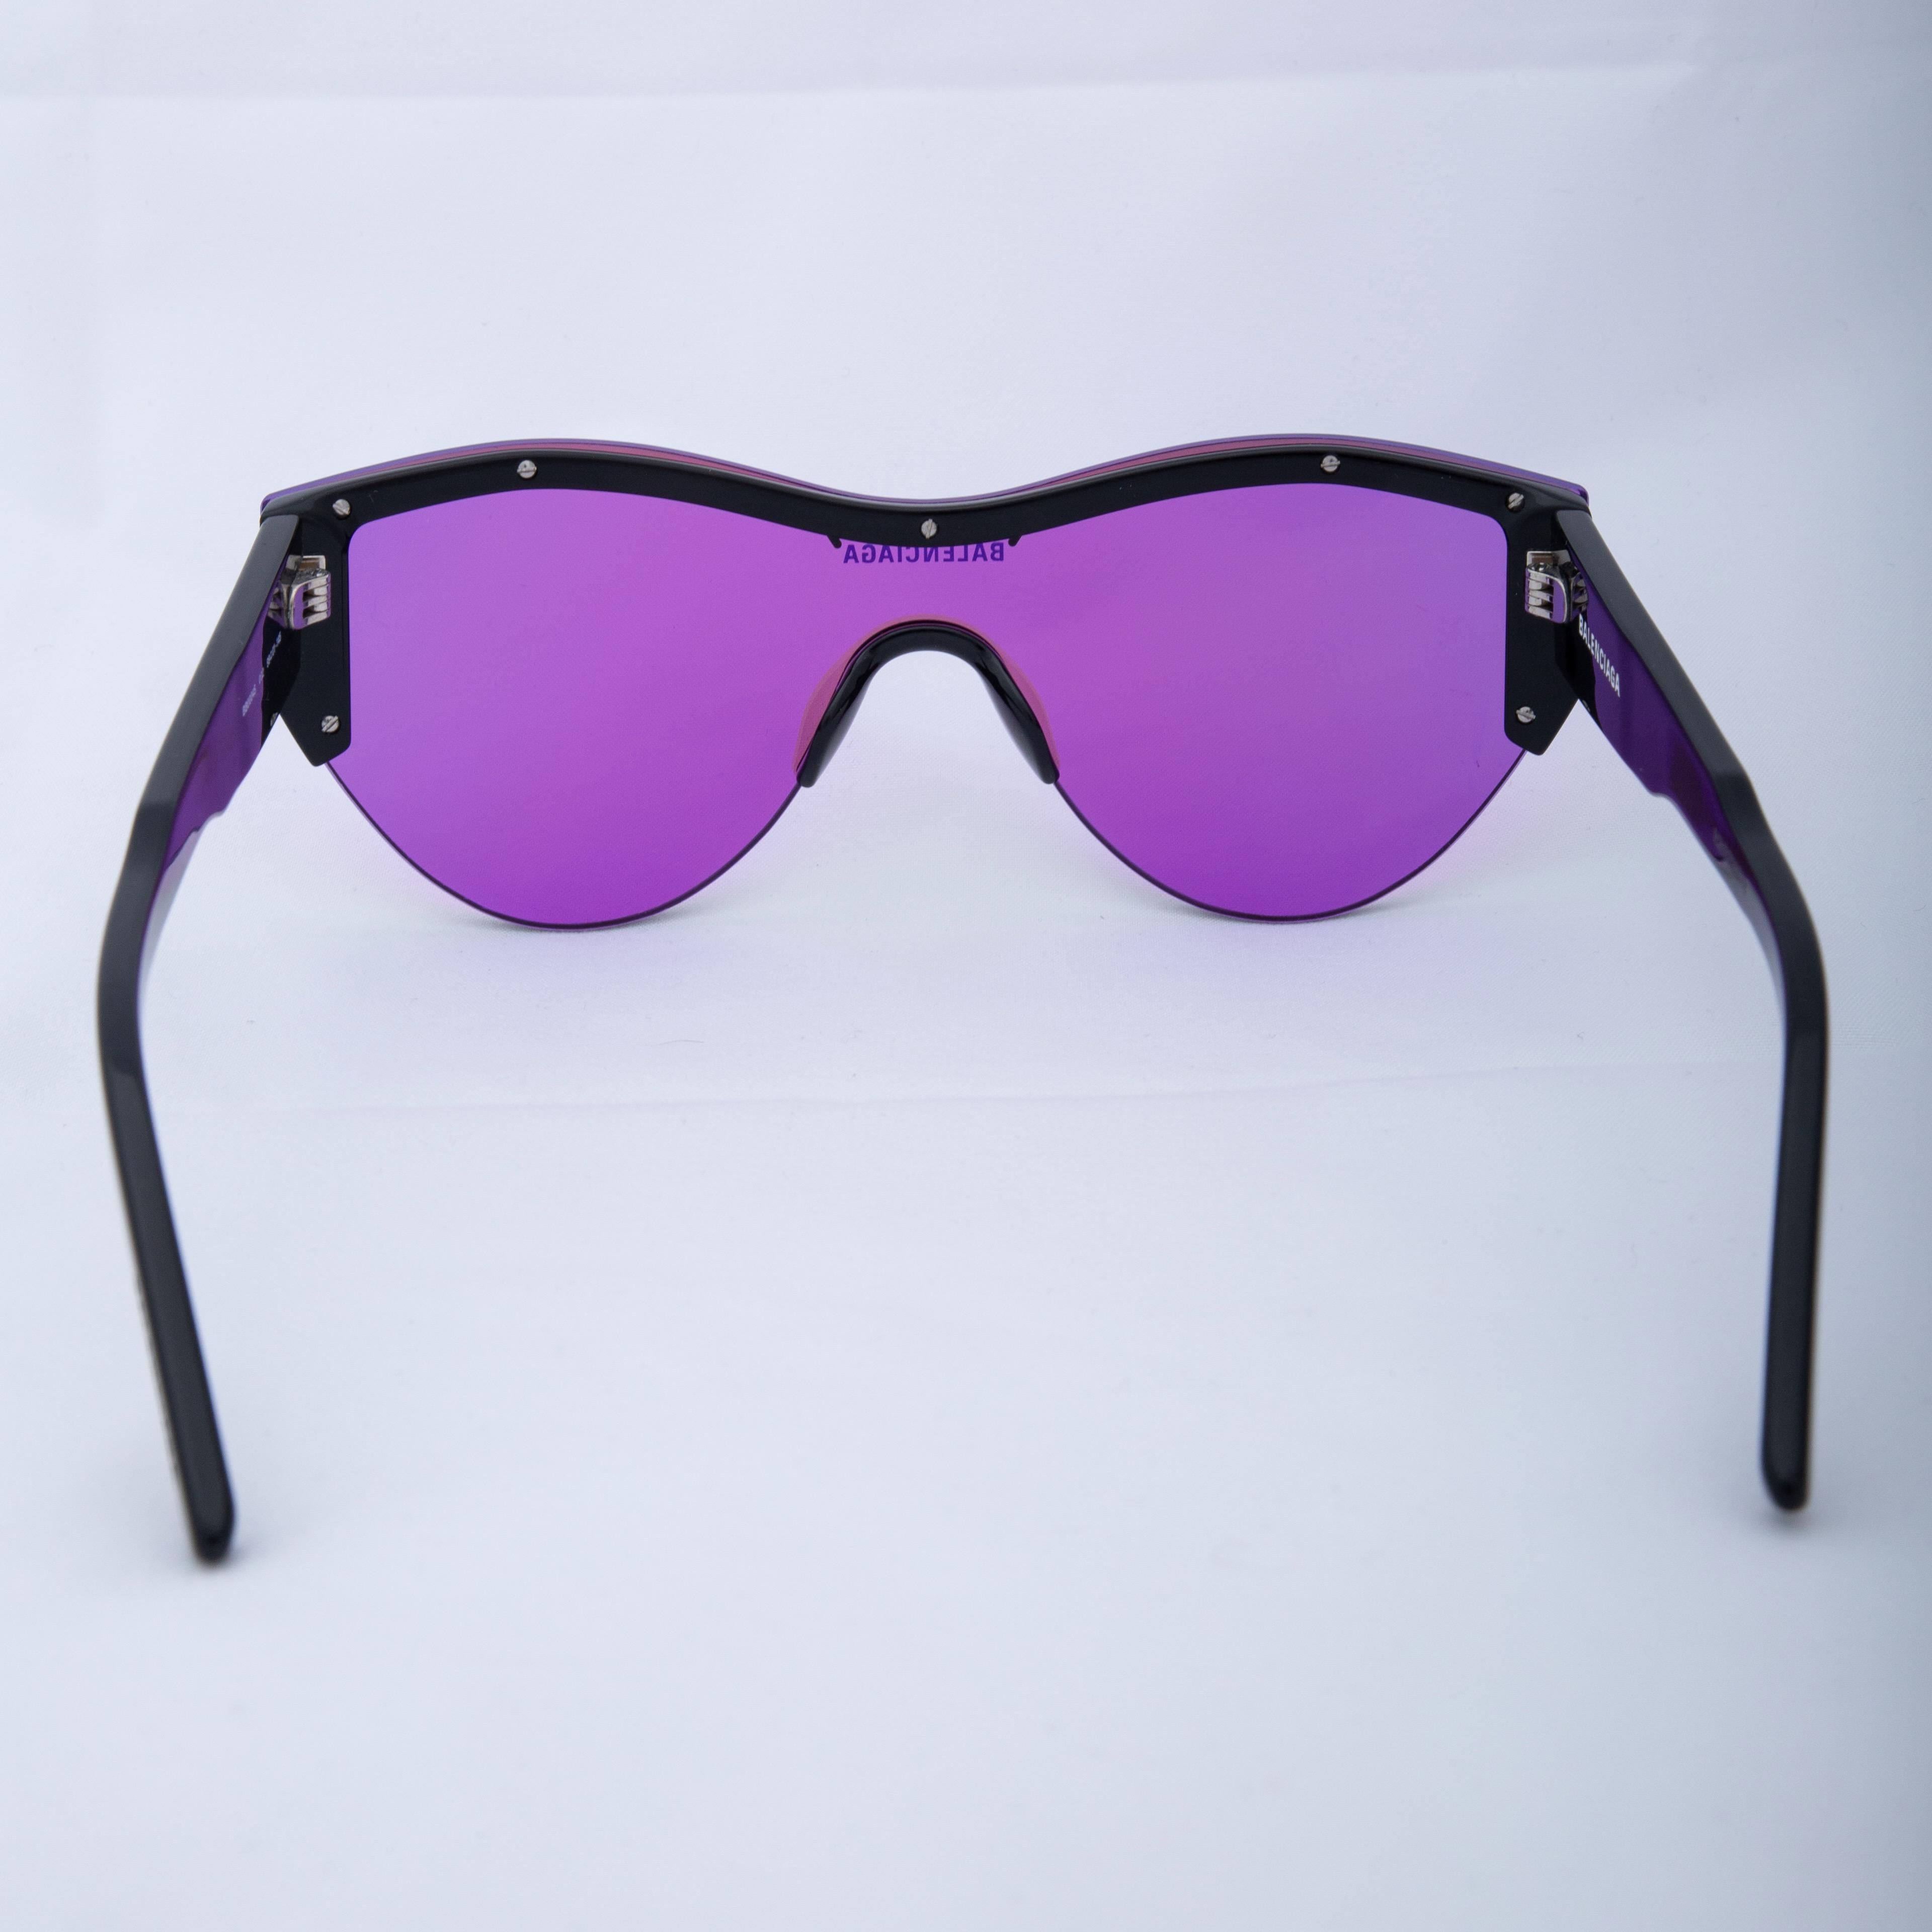 COLOR: Purple
ITEM CODE: BB0004S 002
SIZE STAMP: 99 ☐ 01  145
FRAME MATERIAL: Acetate

MEASURES~
Arms: 145 mm
Lens width: 99 mm
Lens height: 50 mm
Bridge: 01 mm

COMES WITH: Sunglass case
CONDITION: Good - frame & lens show faint scratches.

Made in